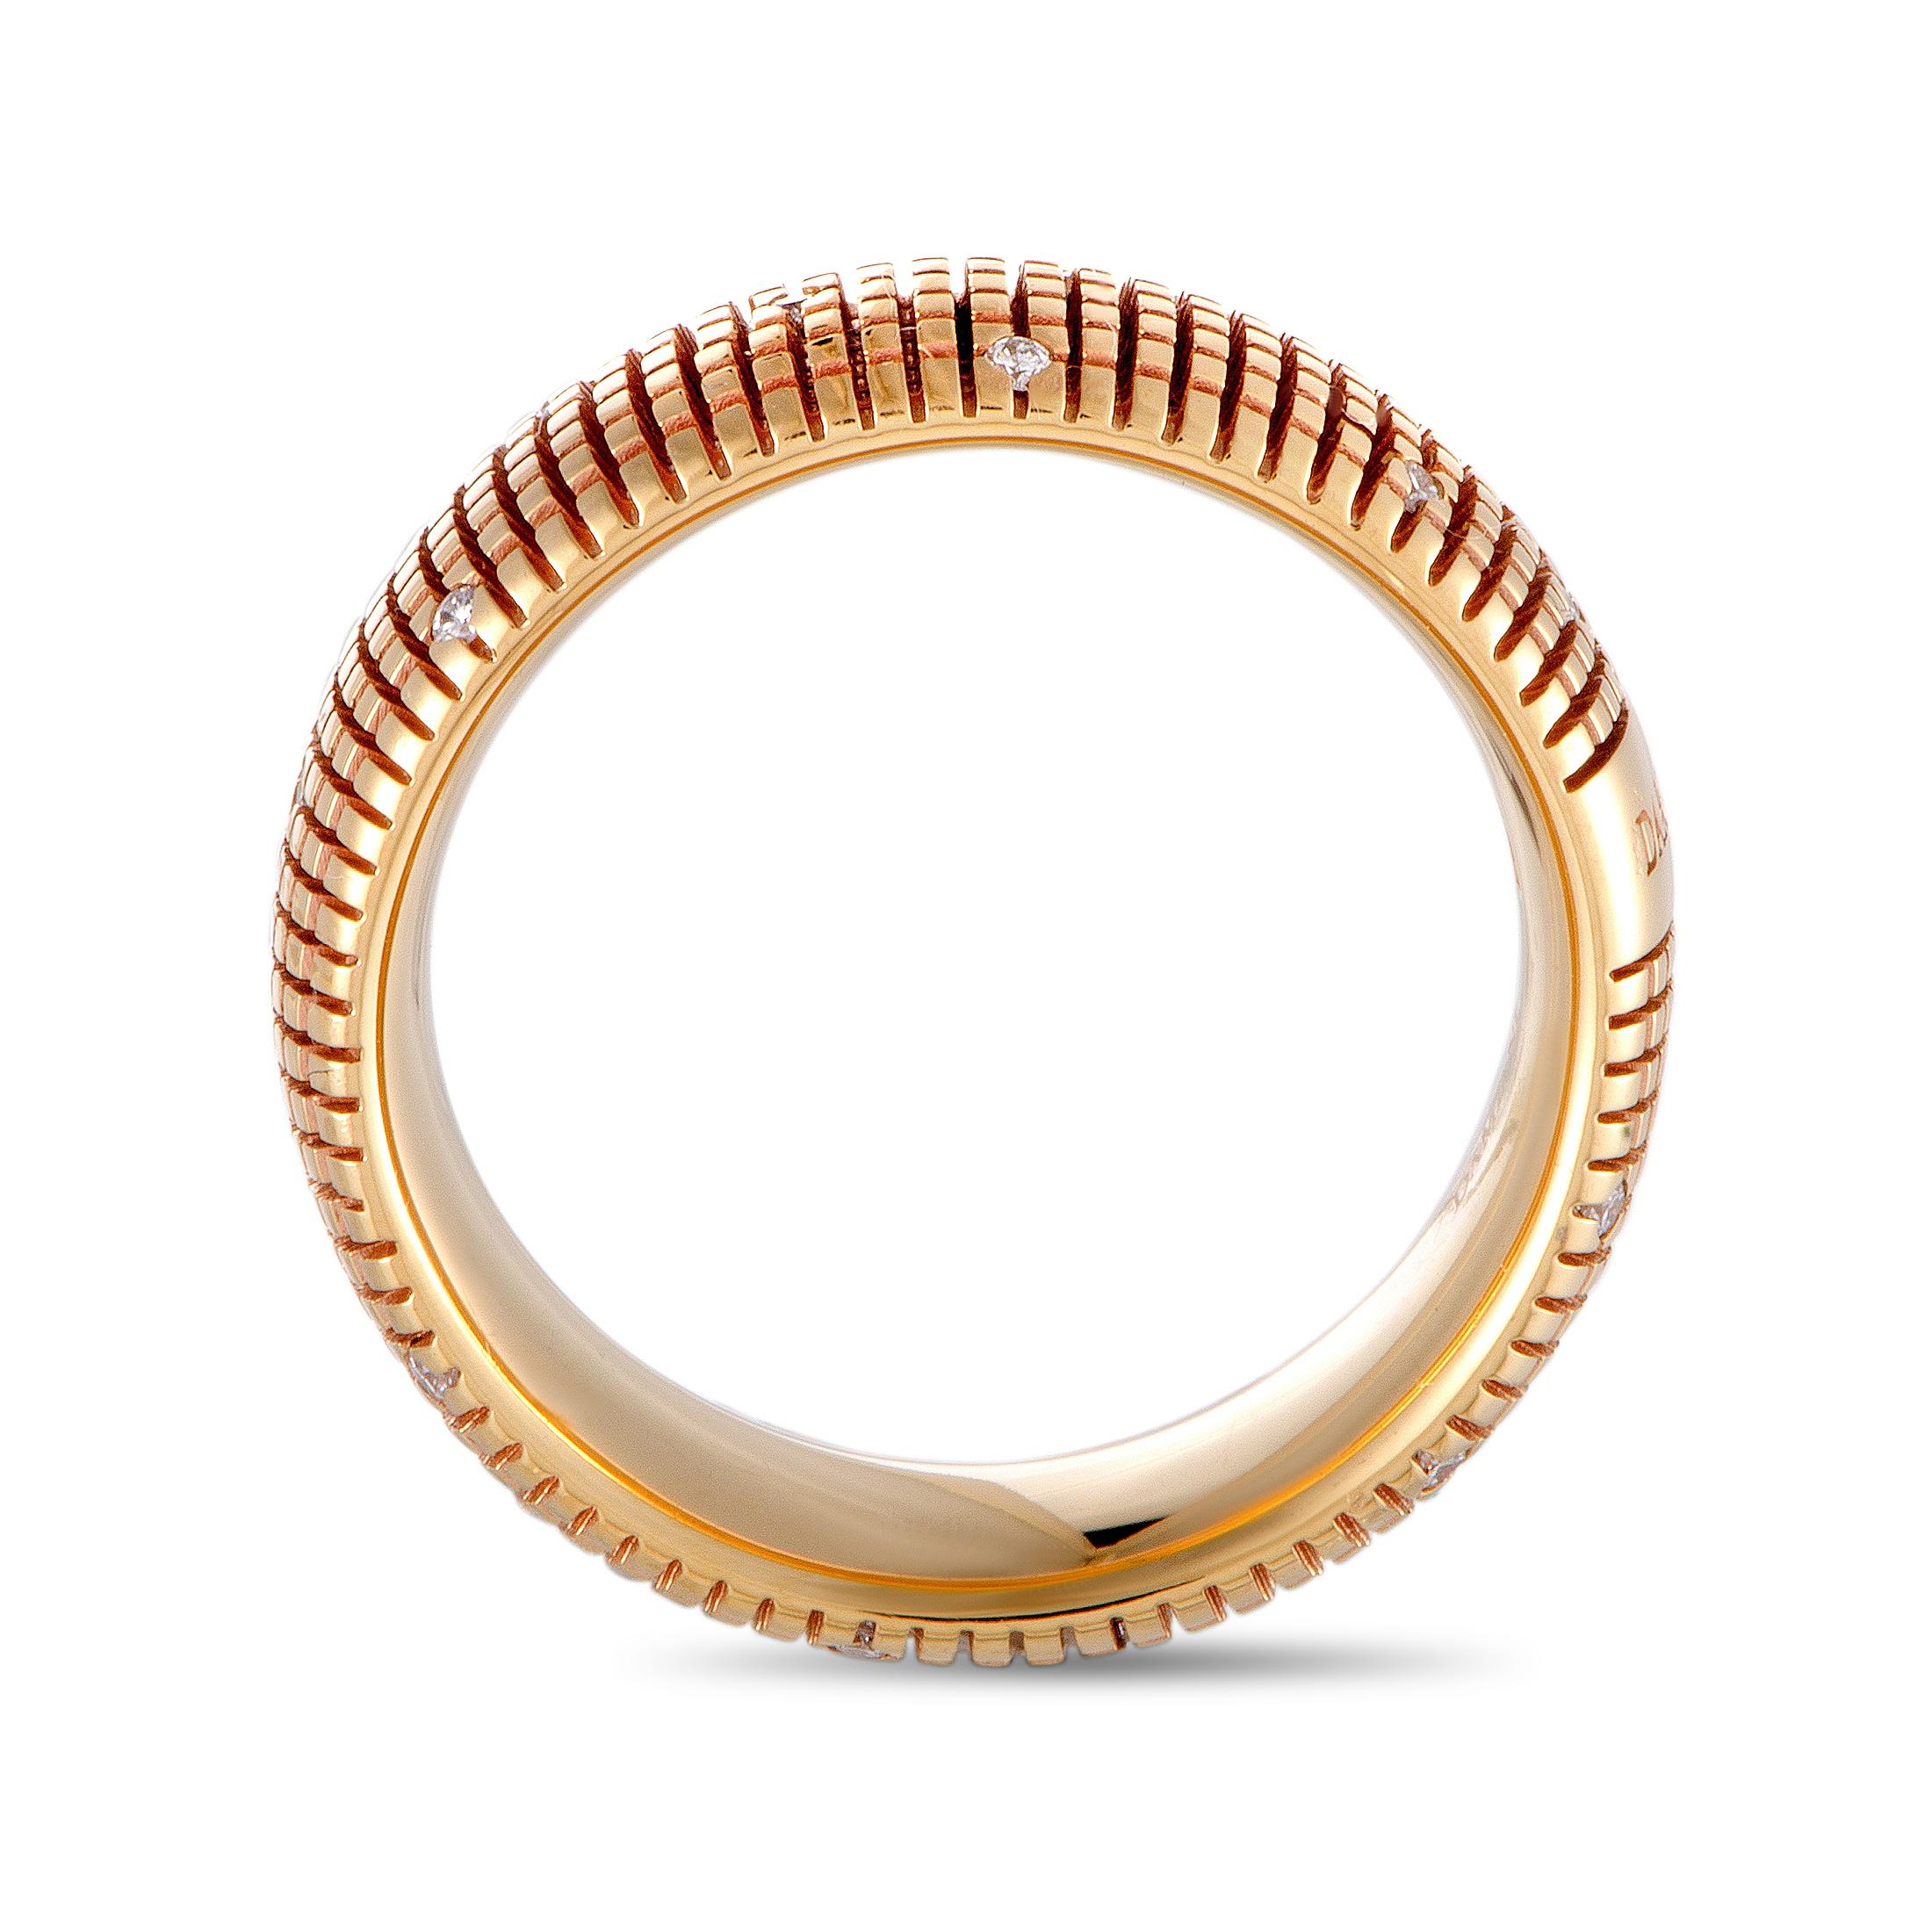 Given a superb feel of refined prestige by the ever-sophisticated sheen of gold and the lustrous resplendence of diamonds, this exceptional ring boasts an incredibly luxurious appeal. The ring is wonderfully designed by Damiani and it is masterfully